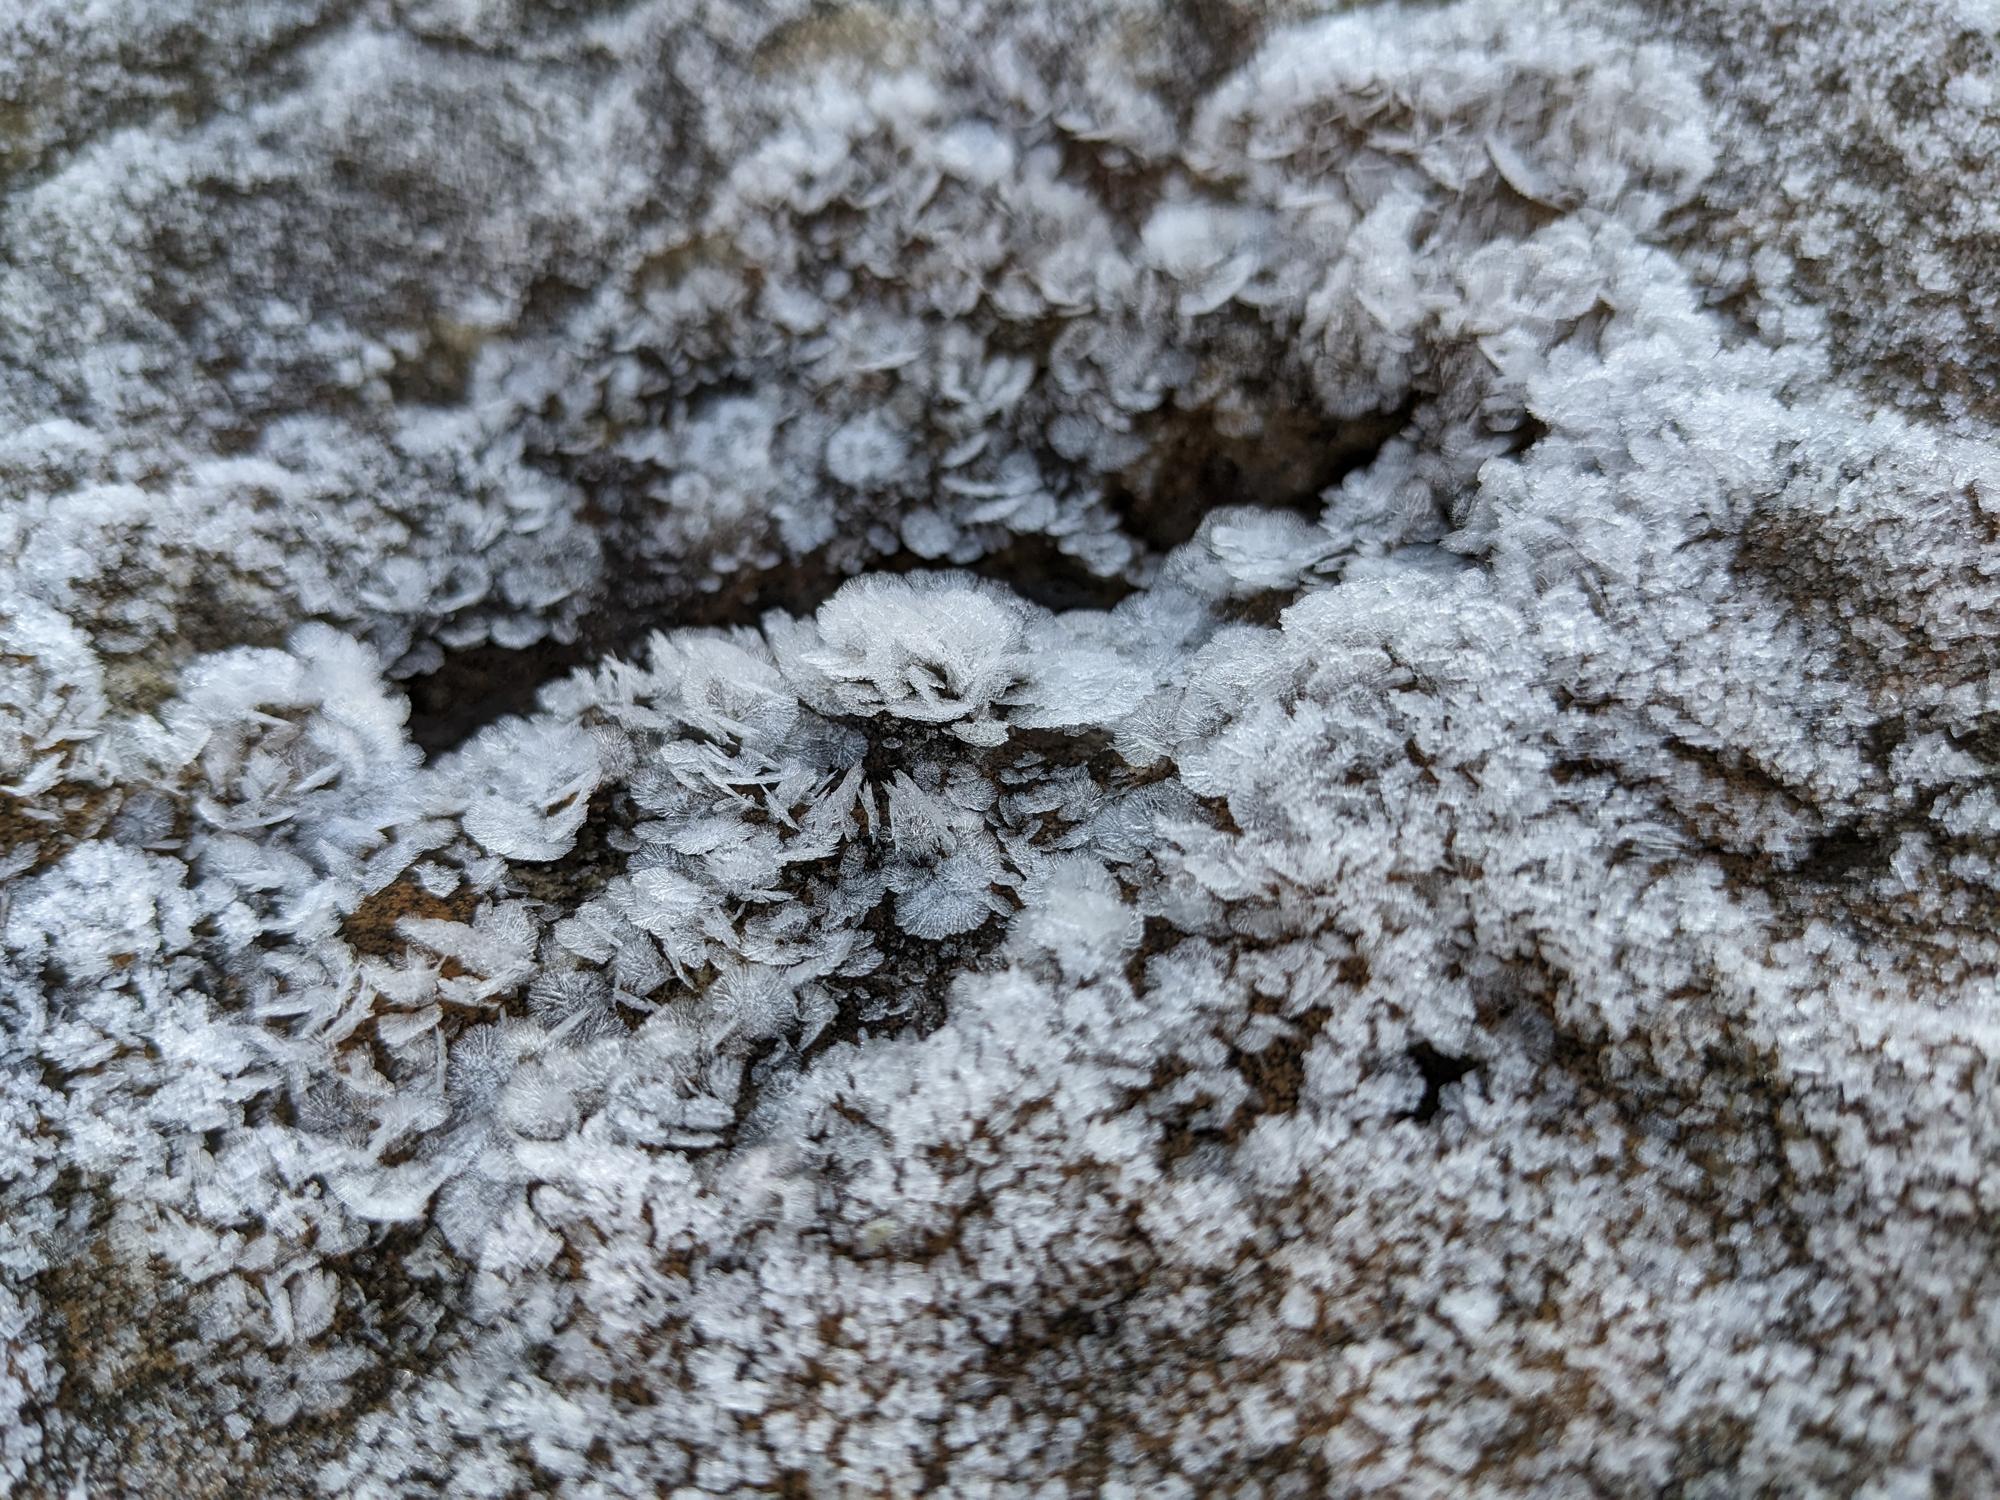 Frozen rose-like forms on a rock